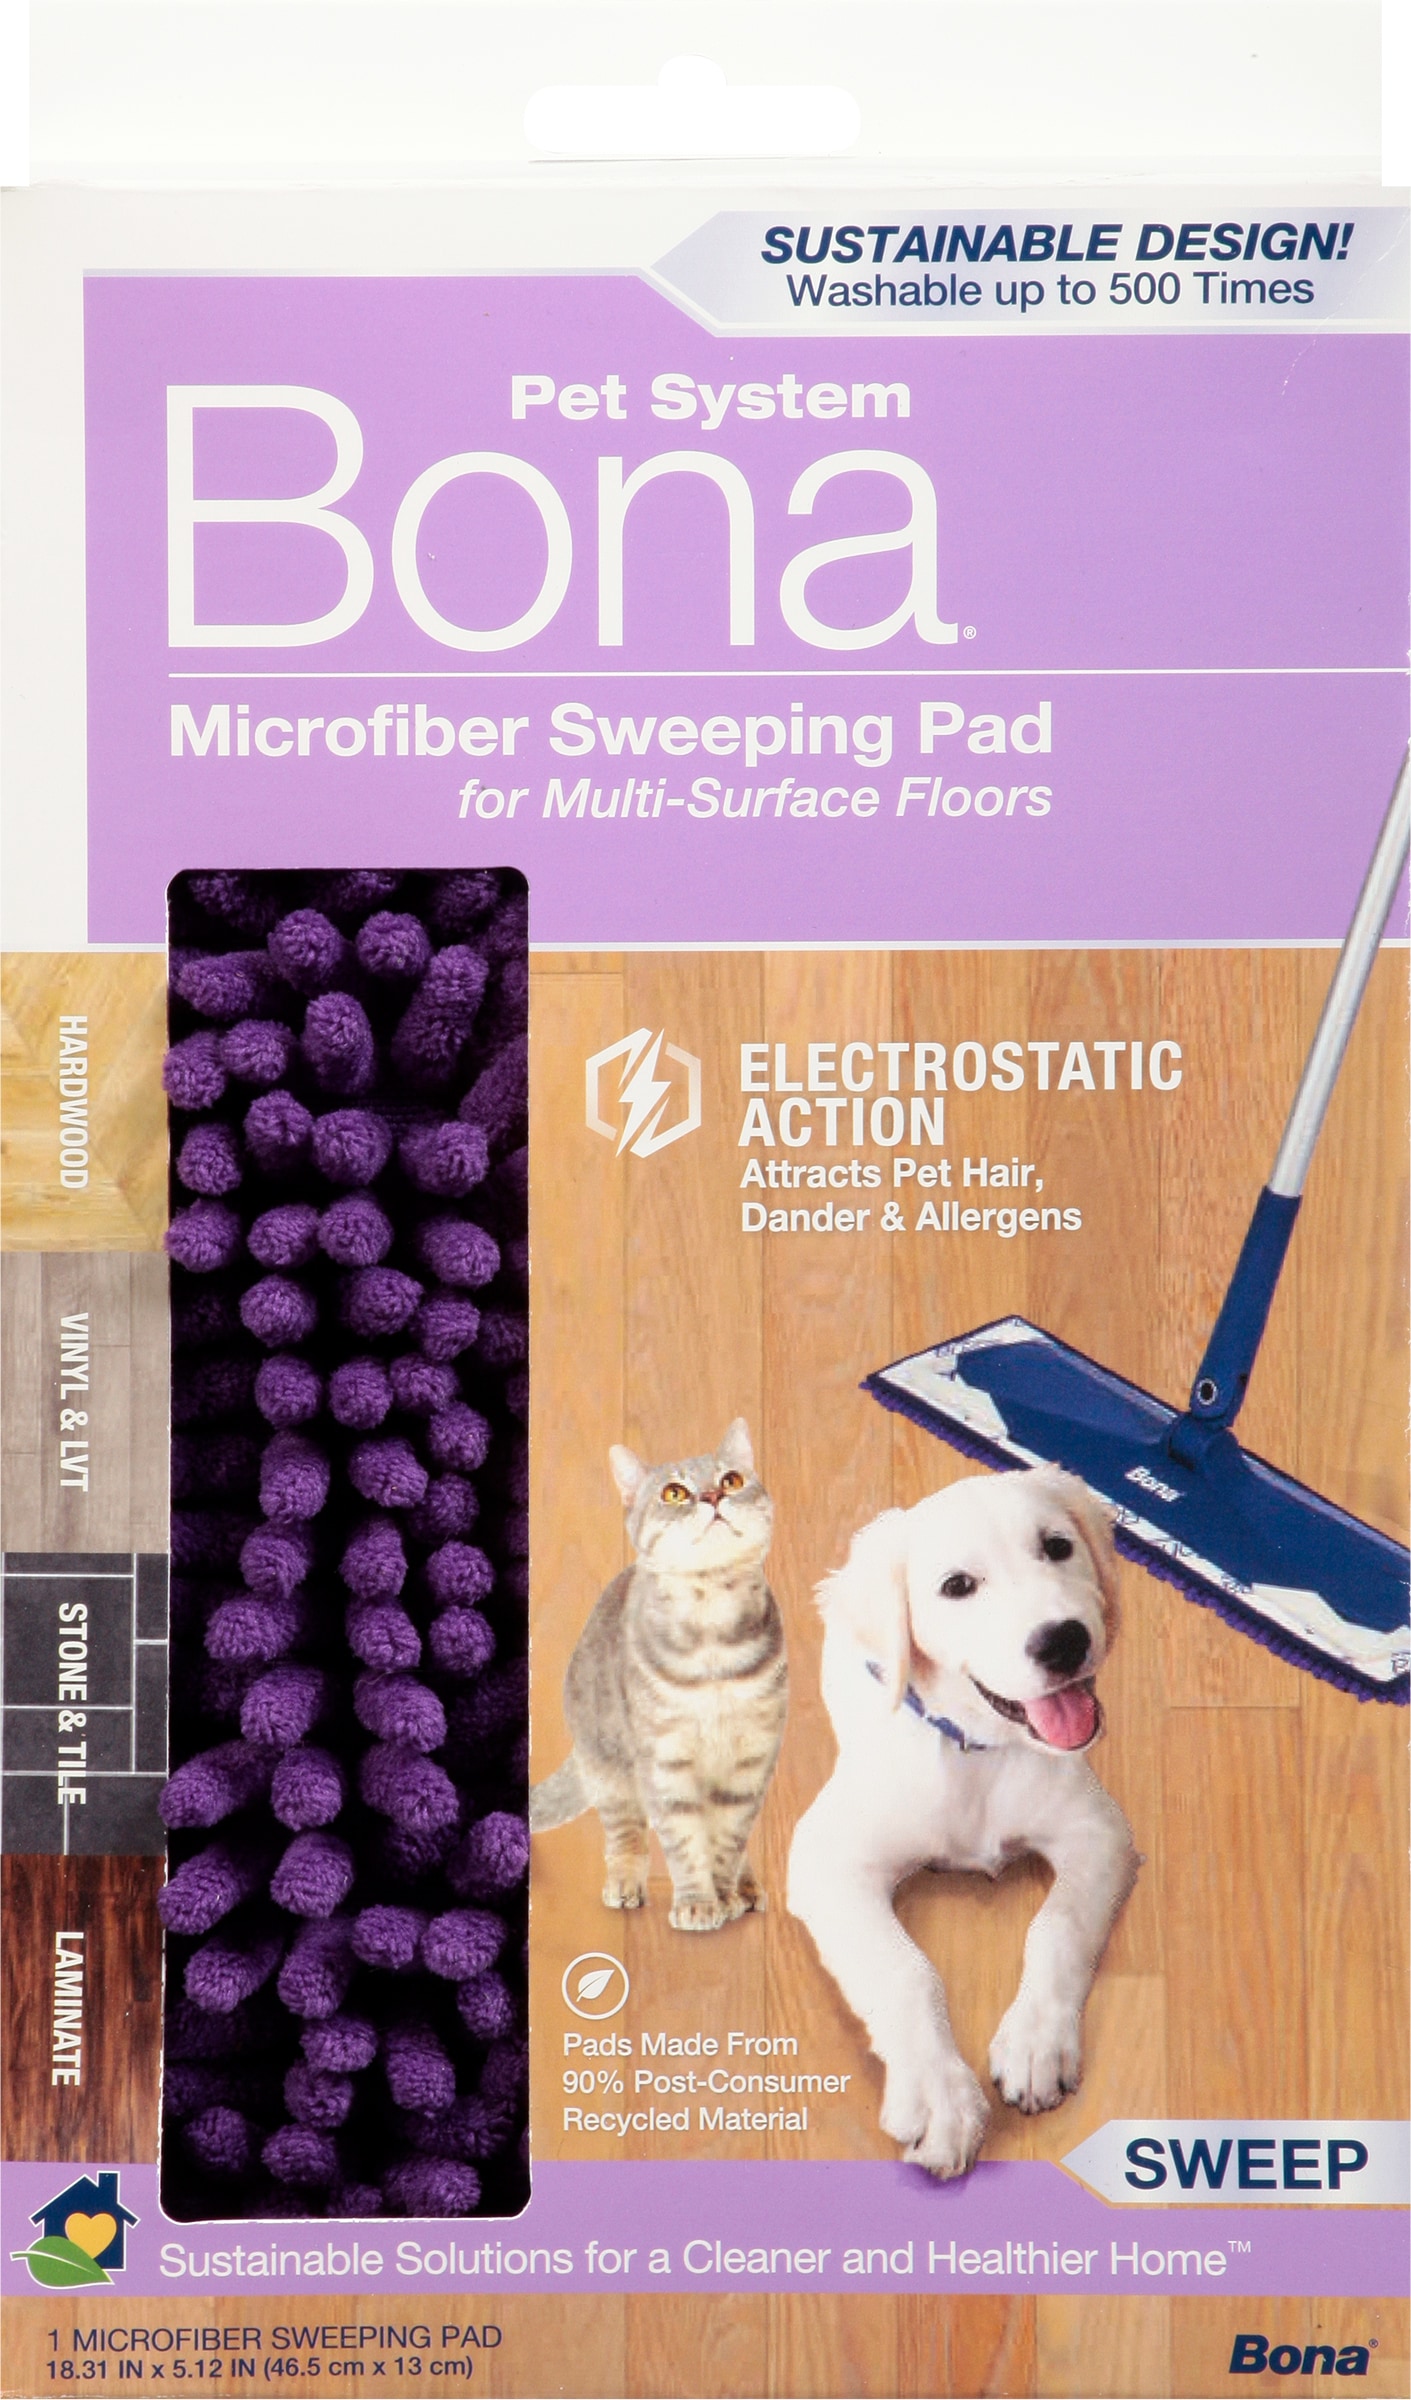 HOMEXCEL Microfiber Mop Floor Cleaning System,18-inch Dust Mop with 2 –  homexcel